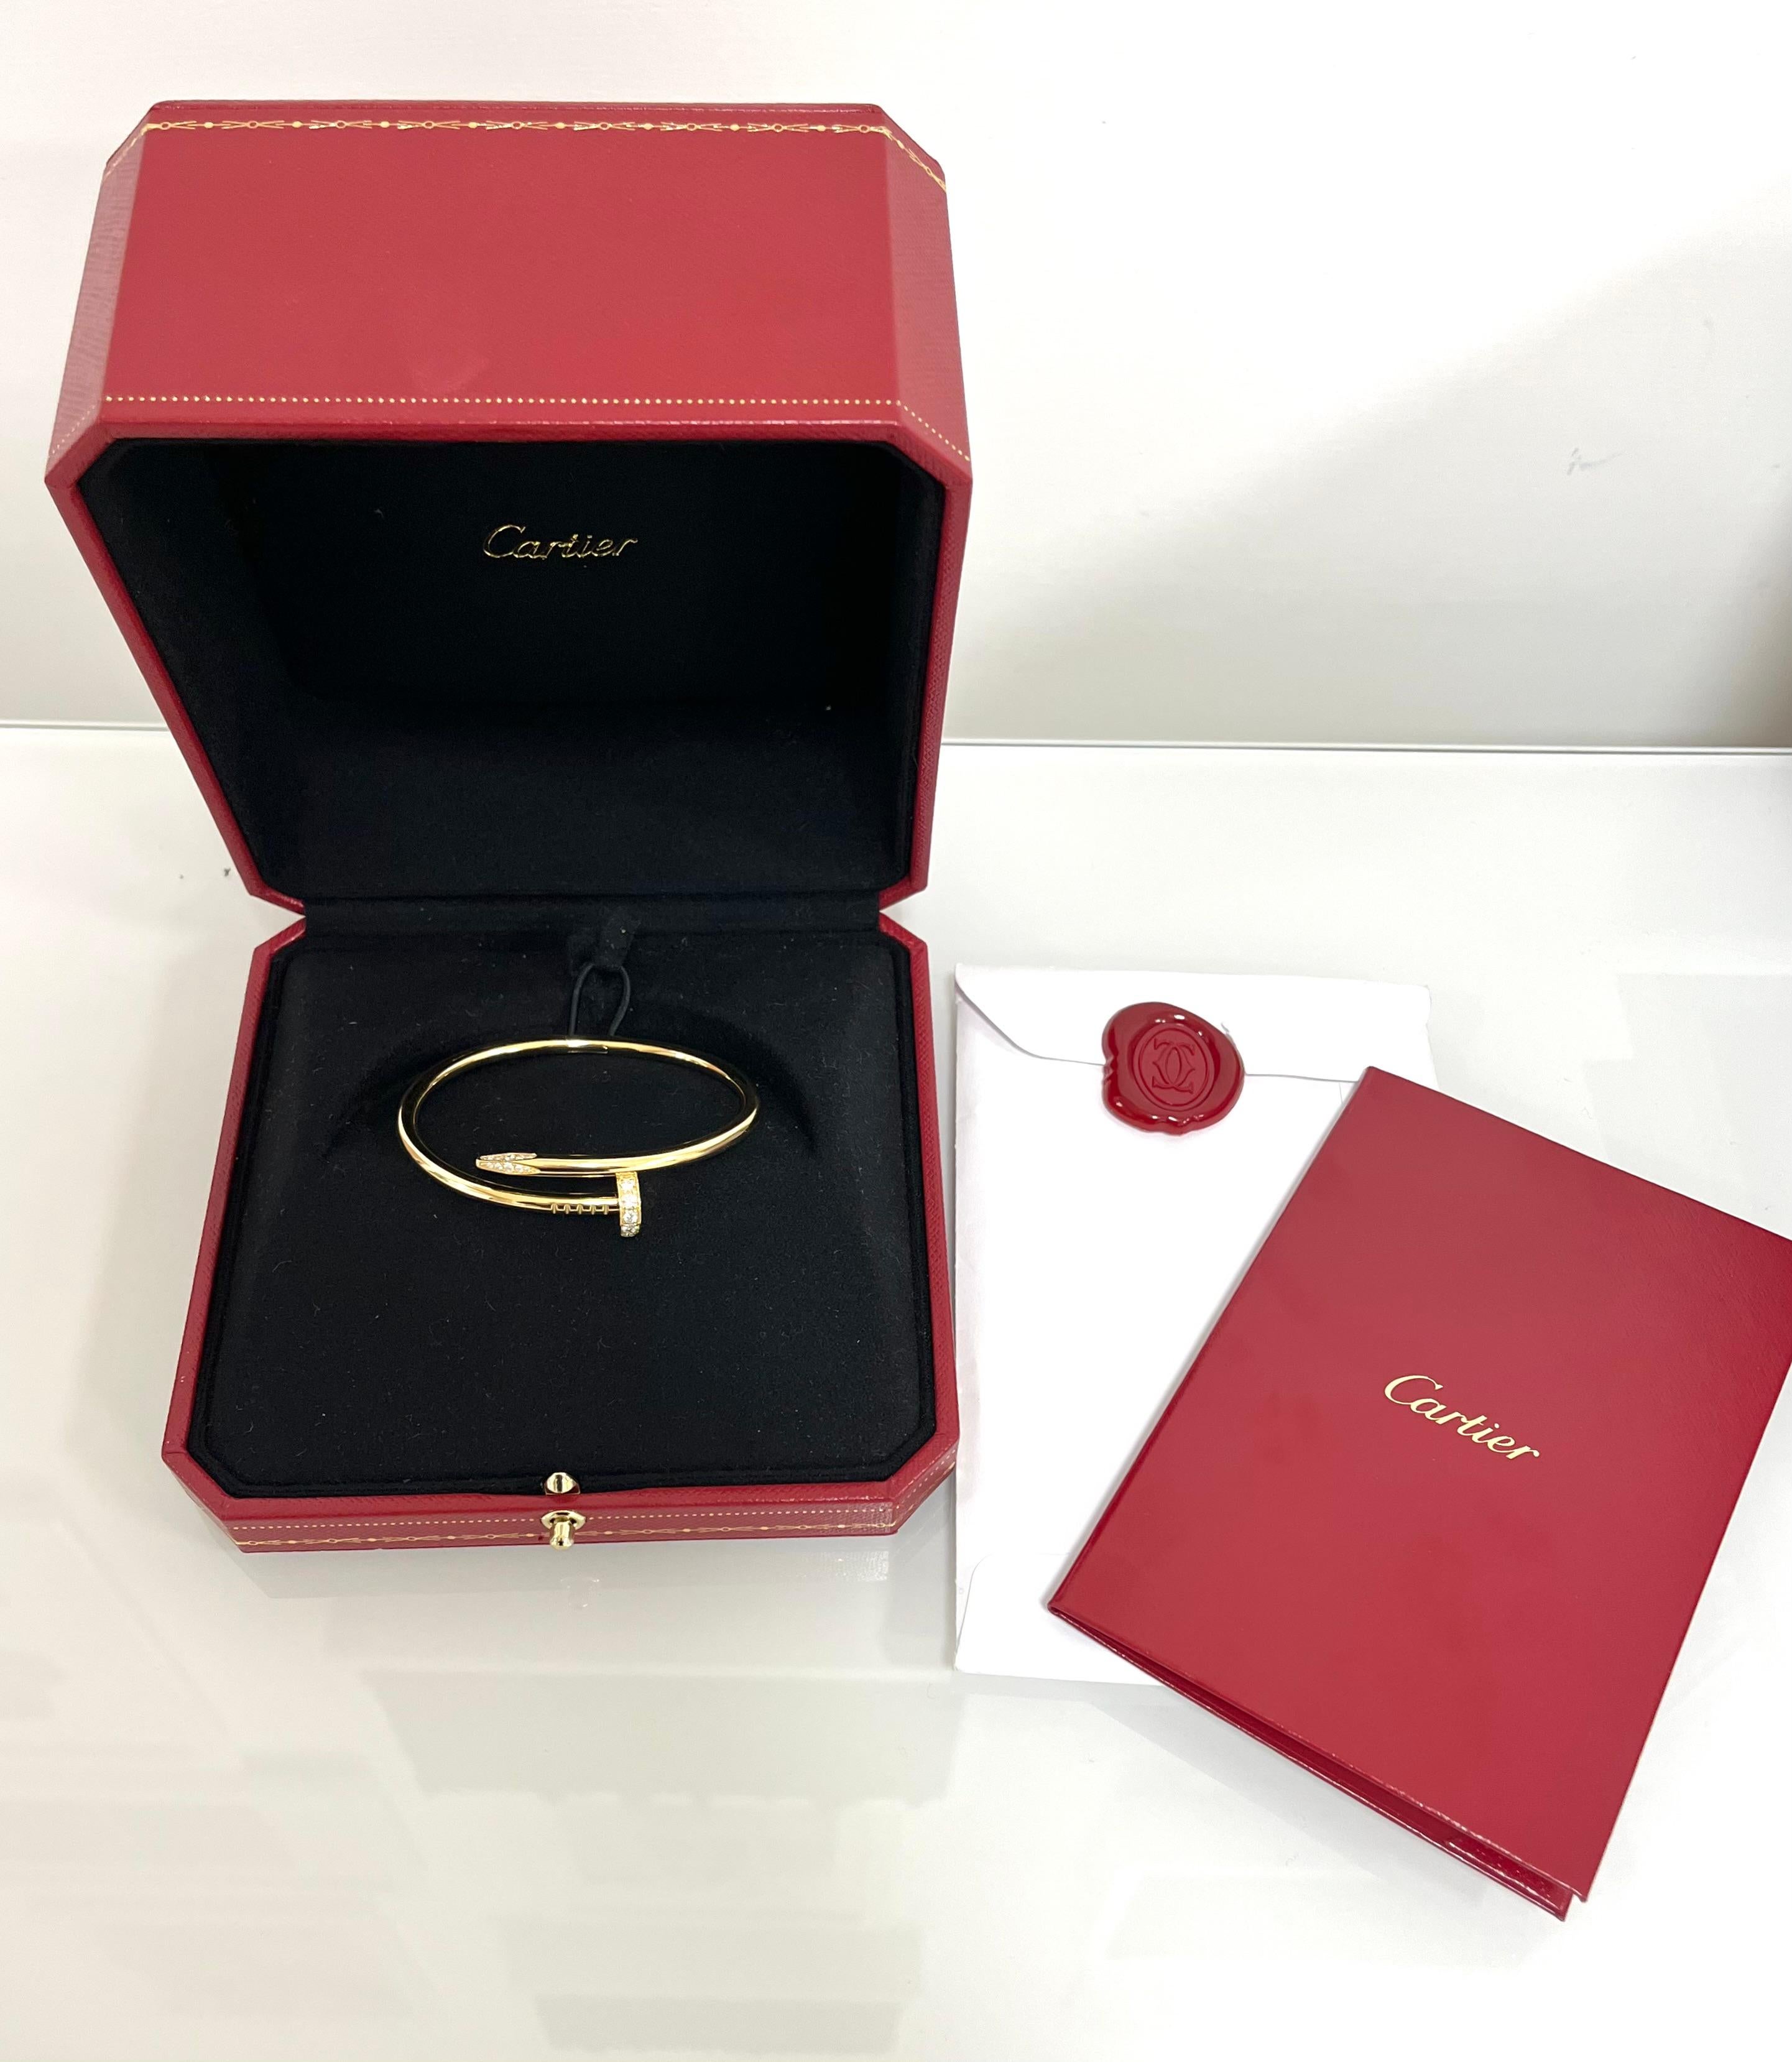 Rigid bracelet in 18 kt. yellow gold and brilliant-cut diamonds signed Cartier.
This iconic bracelet is part of Cartier's Juste un Clou collection.
Perfect for any occasion, it is a must have in one's collection.

Brilliant-cut diamonds ct. 0.58
18